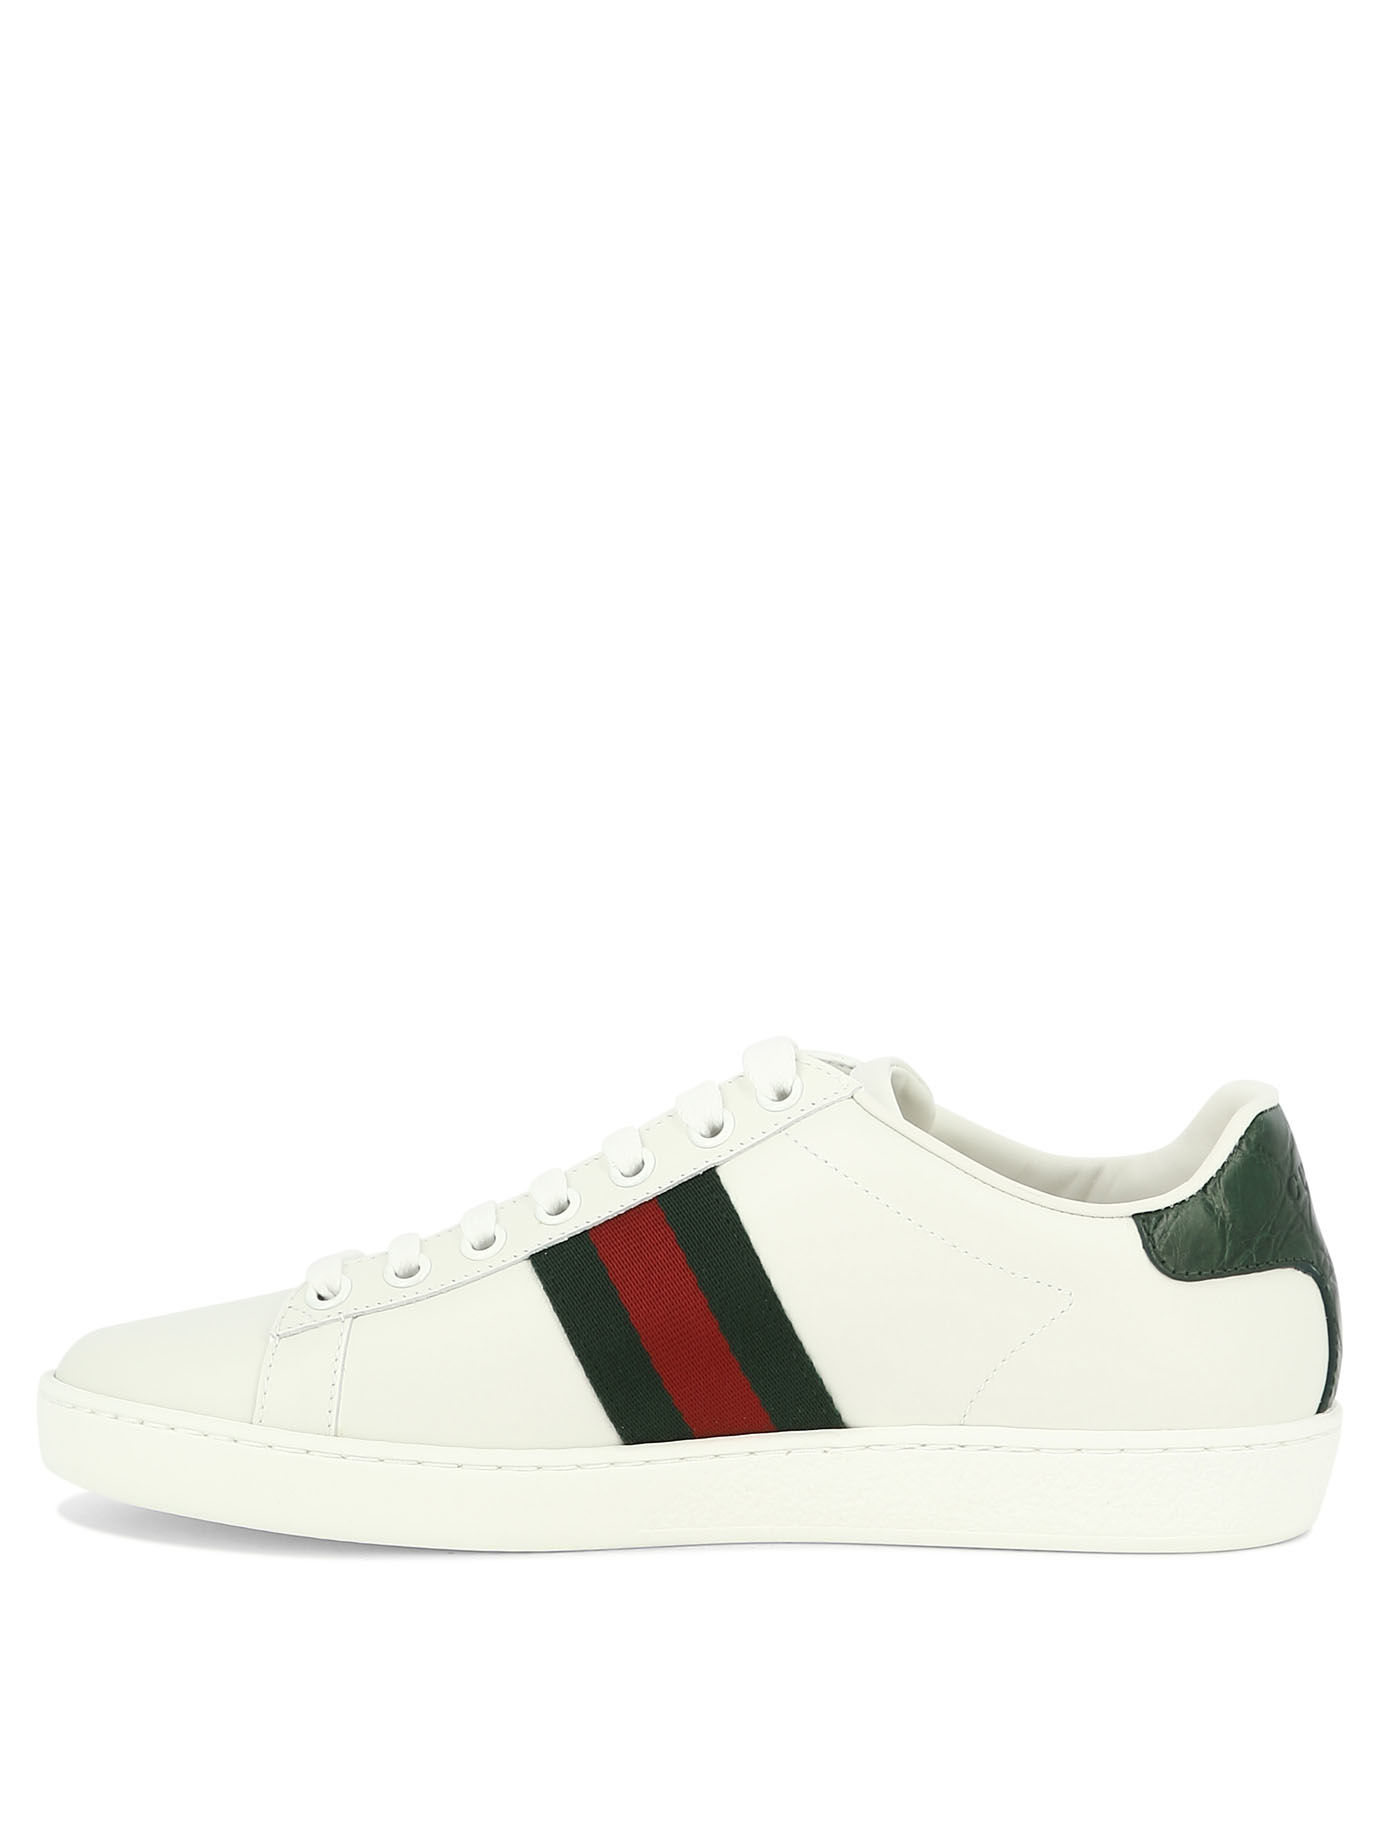 GUCCI Women's Ace Sneakers